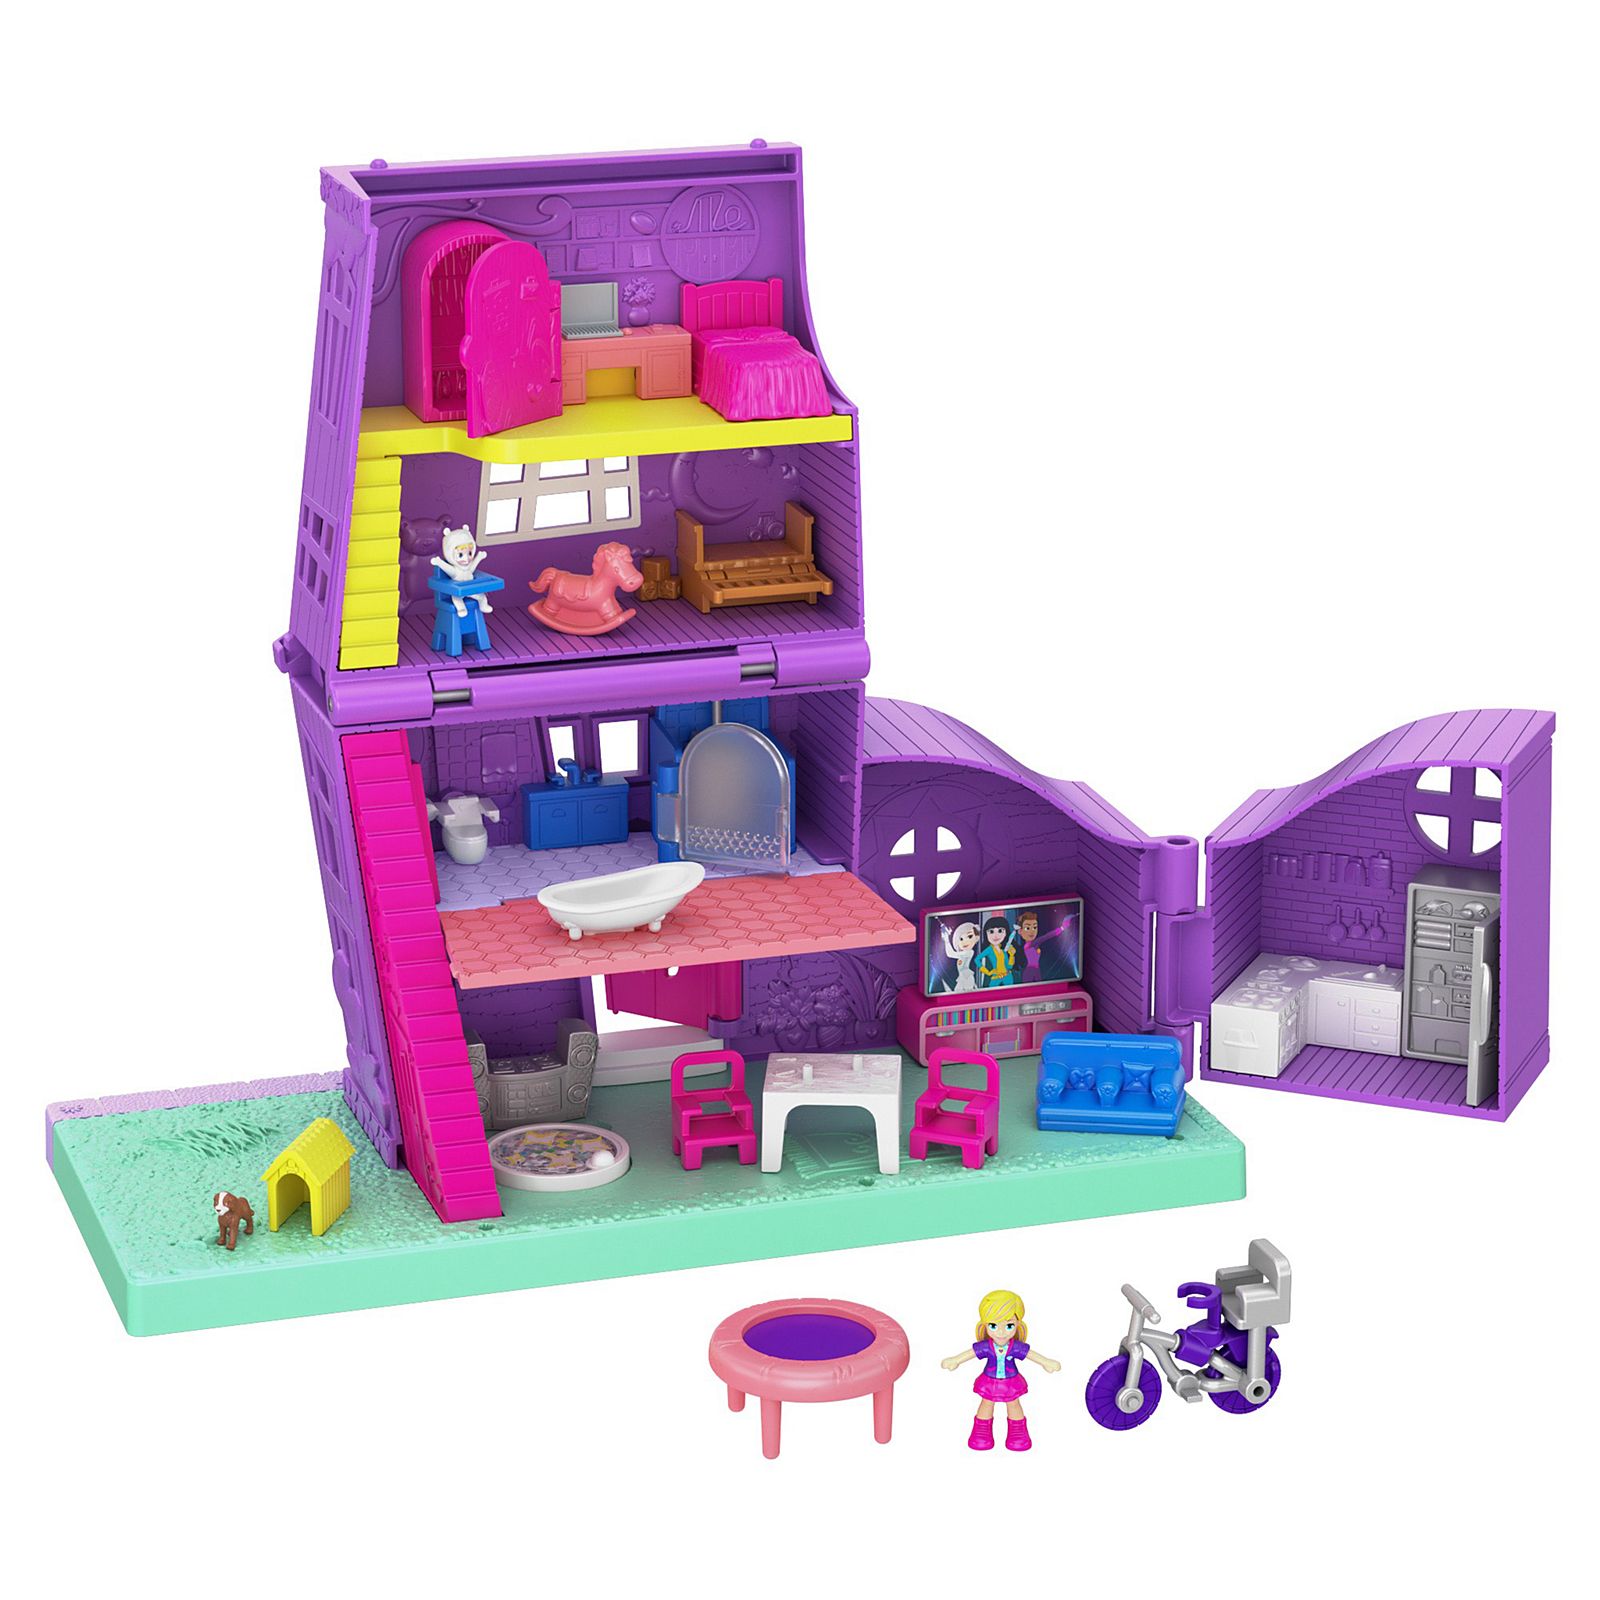 Polly Pocket Spin 'n Surprise Compact Playset, Tropical Smoothie Shape,  Waterpark Theme, 3 Floors, 25 Surprise Accessories Inc - ToysChoose